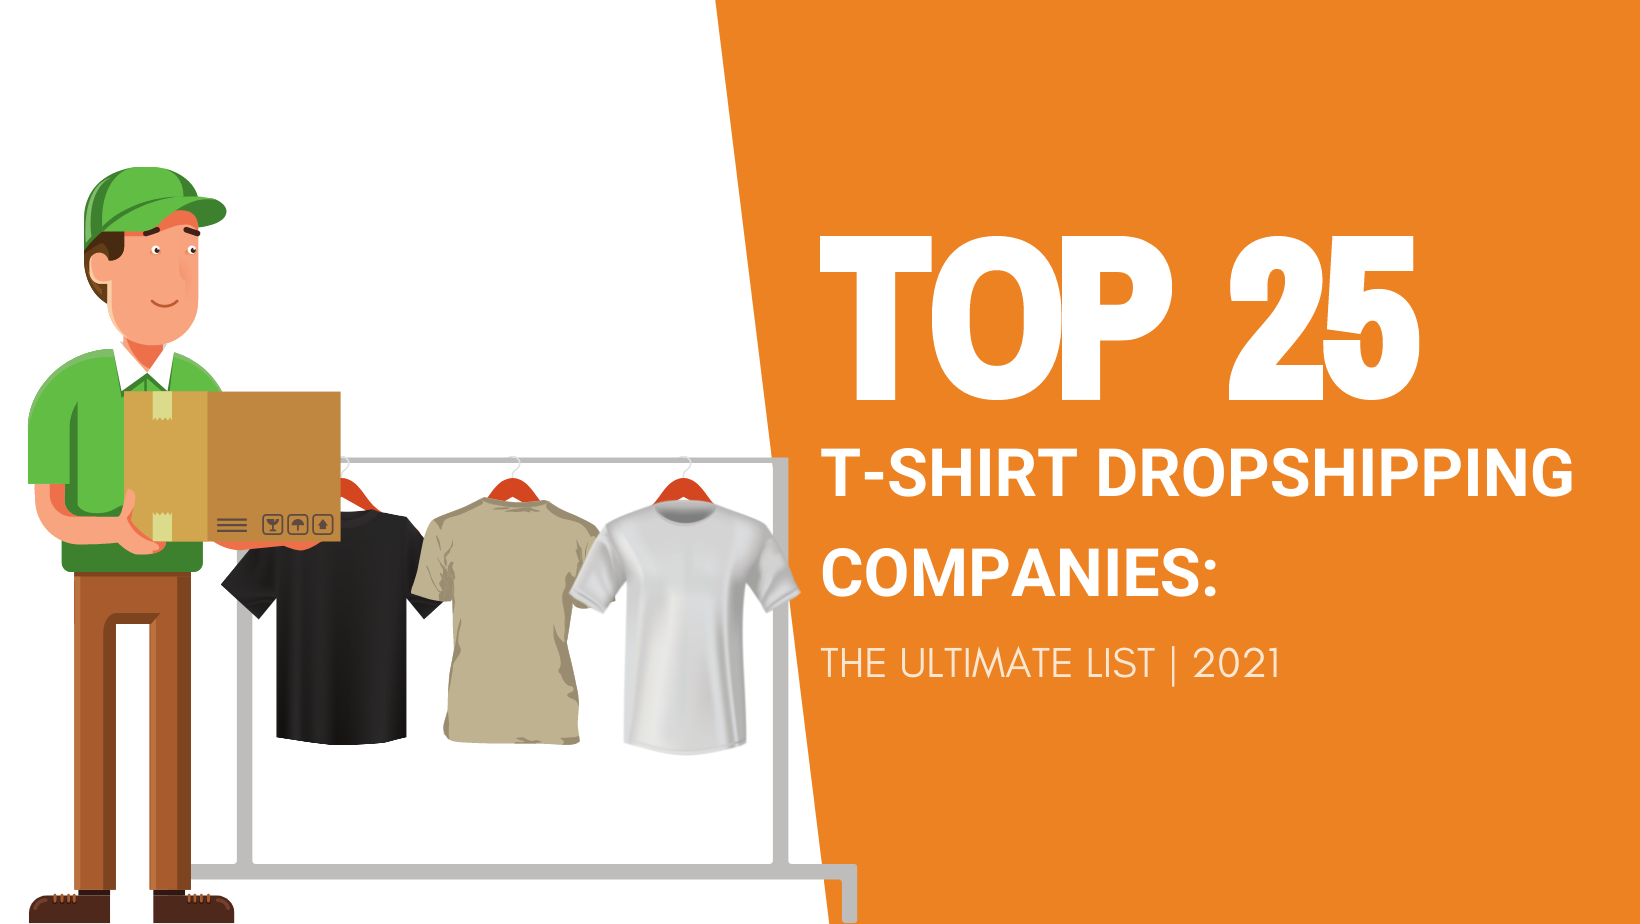 TOP 25 T-SHIRT DROPSHIPPING COMPANIES THE ULTIMATE LIST 2021